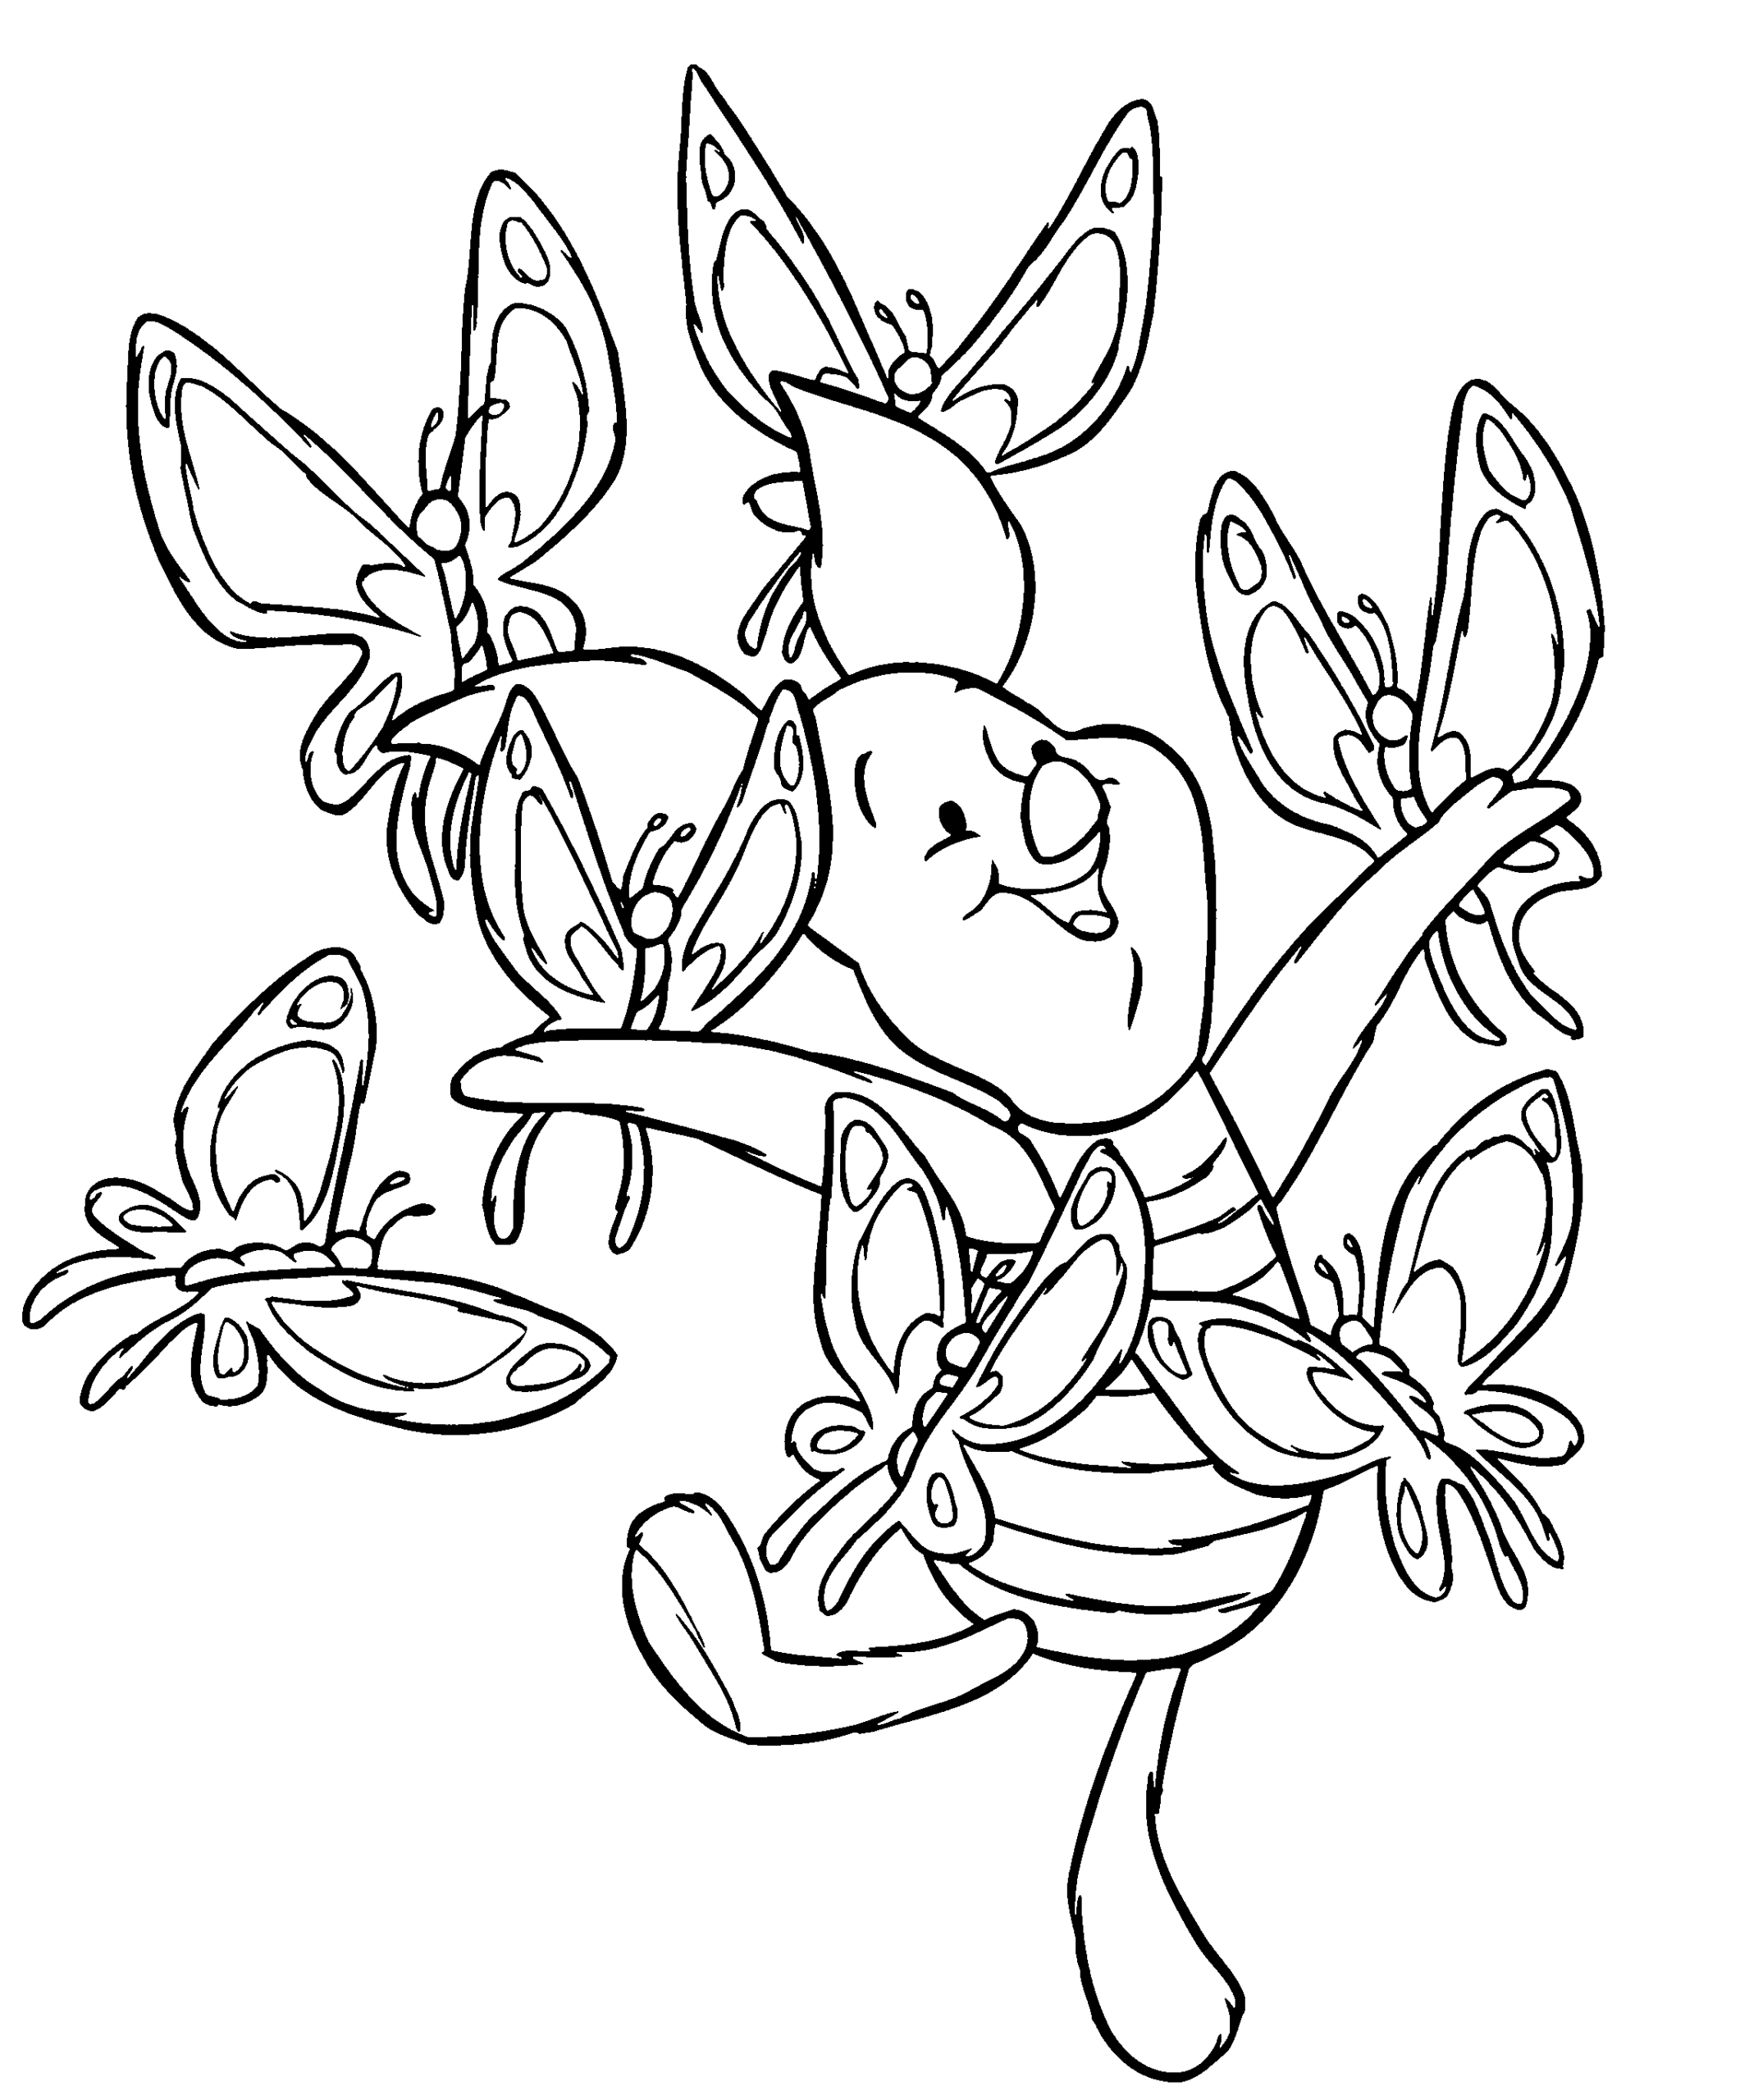 Winnie the Pooh Coloring Pages Cartoons Winnie The Pooh Piglet Printable 2020 7243 Coloring4free